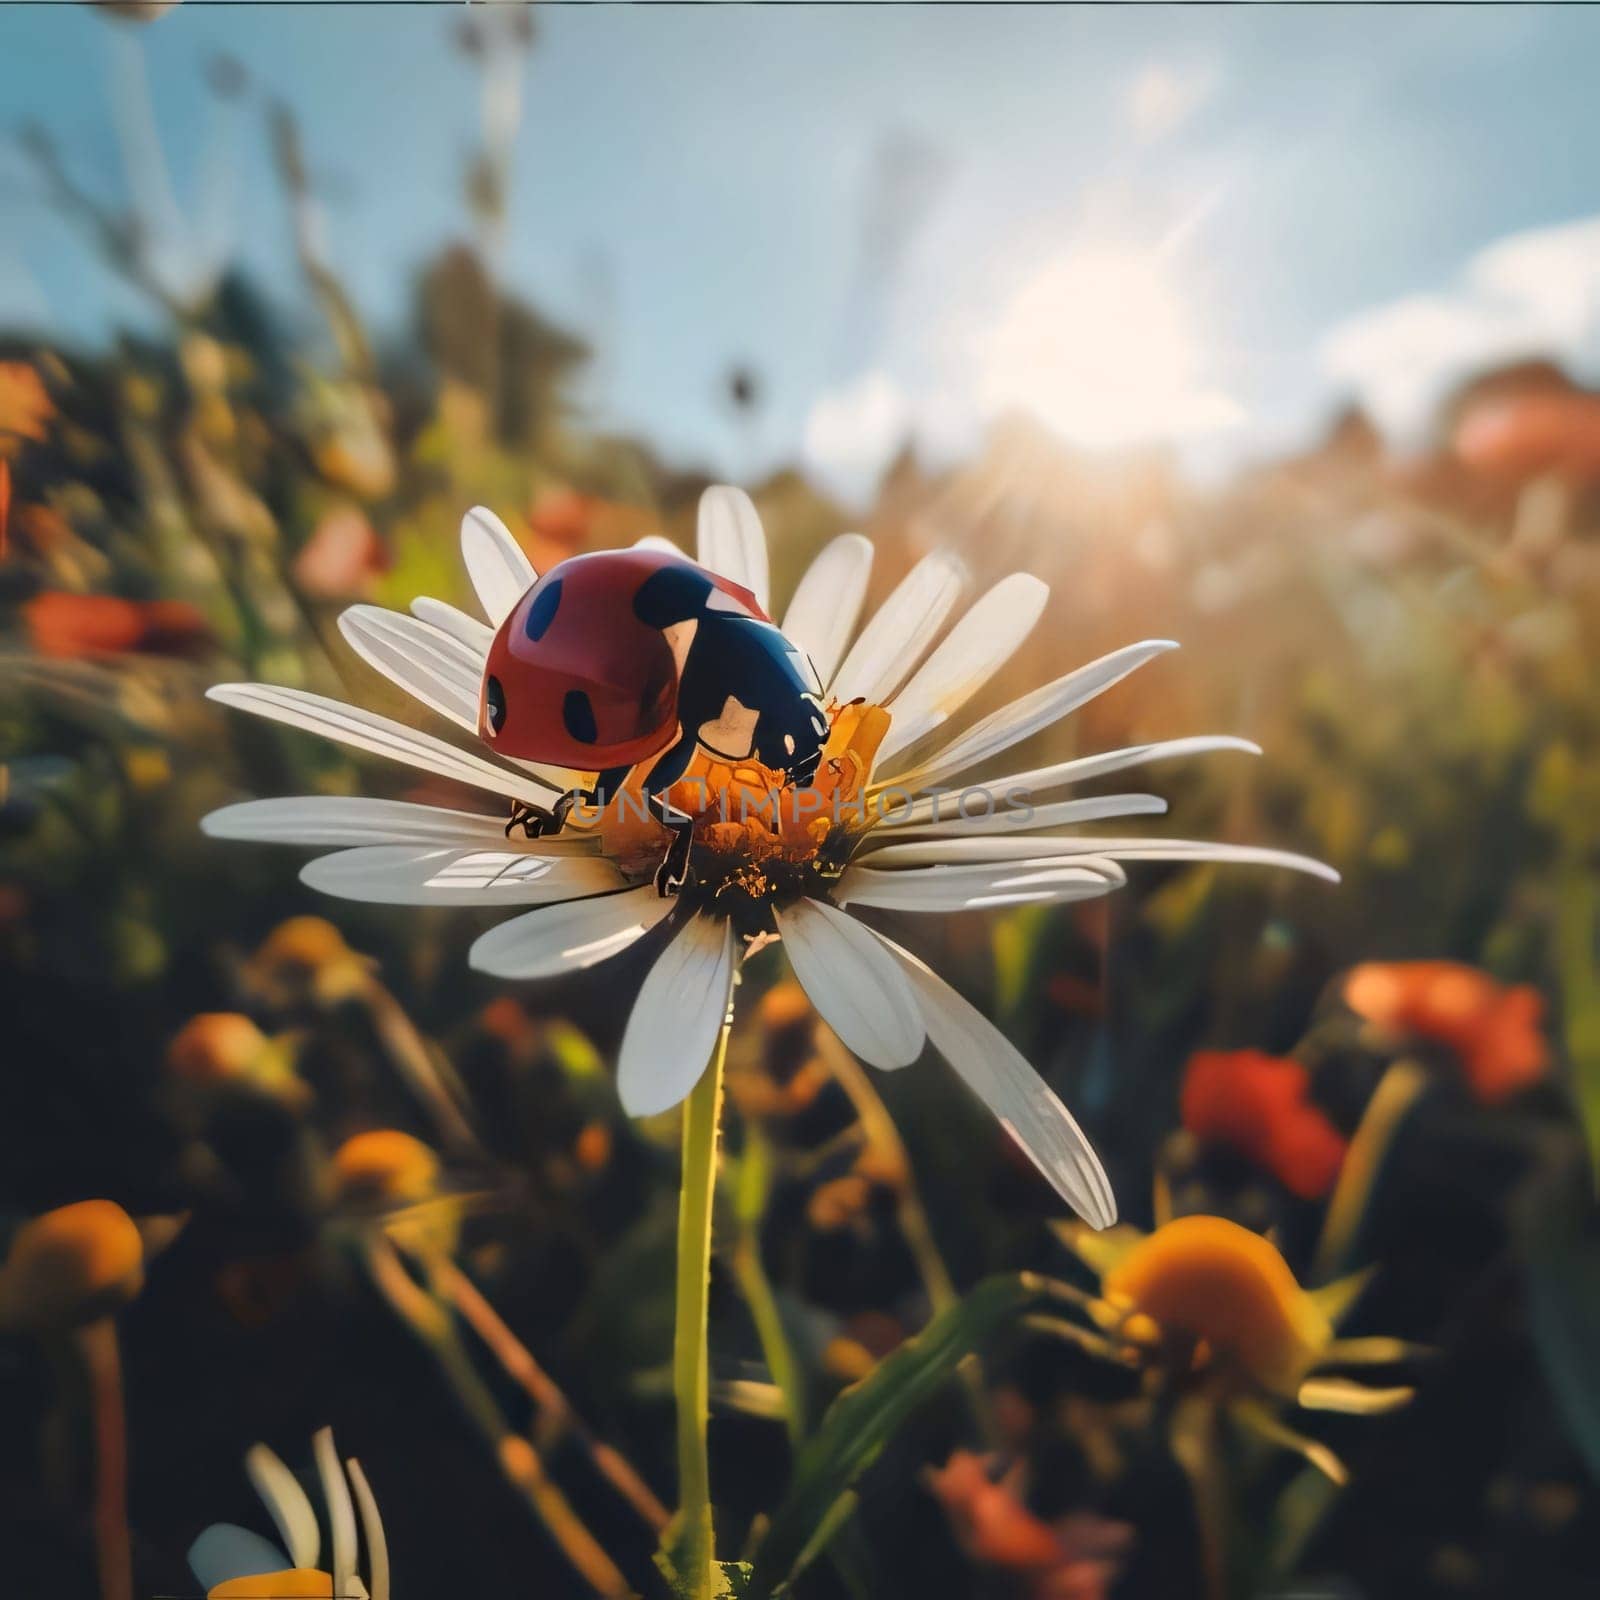 Red ladybug sitting on a white flower, smudged background sunset rays. Flowering flowers, a symbol of spring, new life. by ThemesS